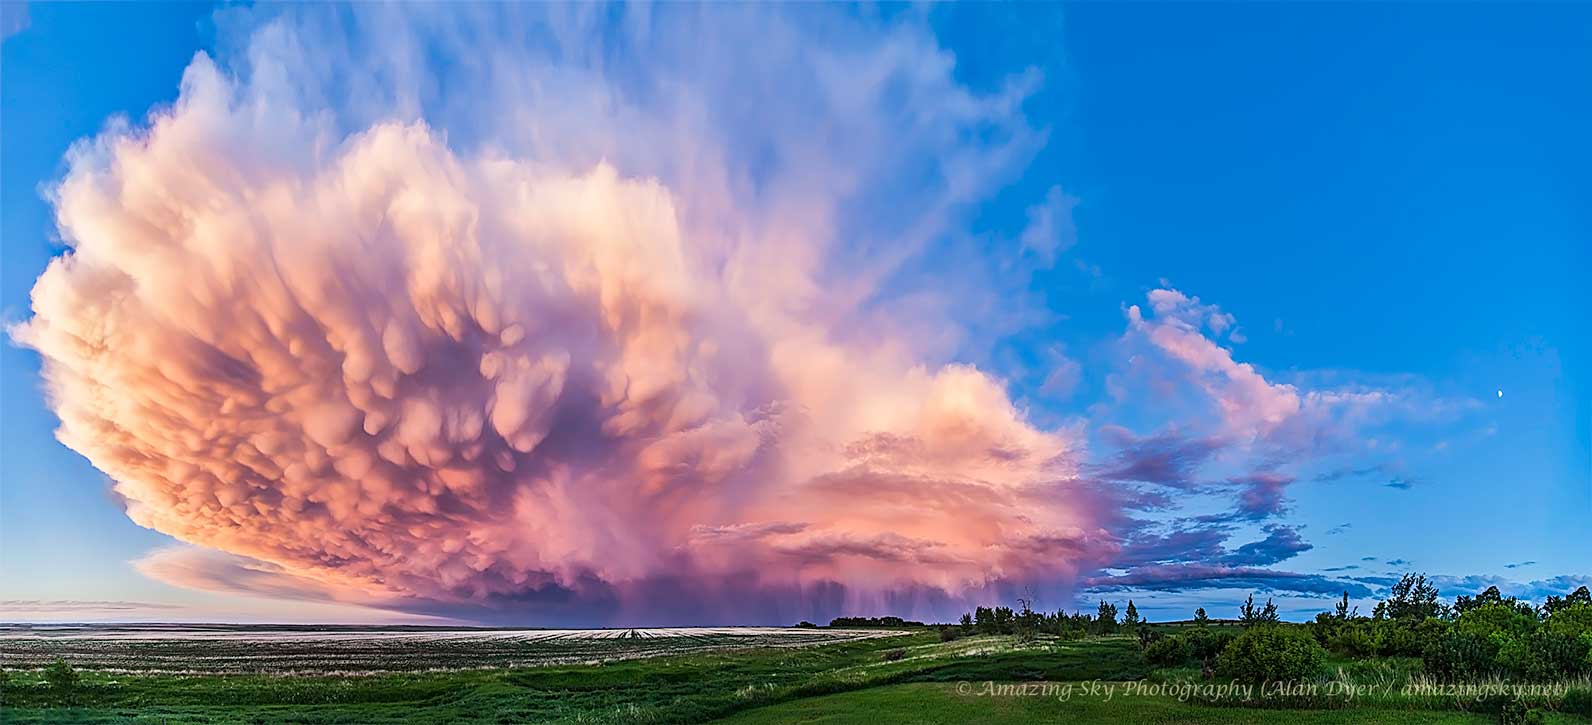 The featured image shows a cumulonimbus cloud retreating
at sunset in 2013 over Alberta, Canada. The large cloud exhibits
mammatus clouds at the near end and rain at the far end.
Please see the explanation for more detailed information.